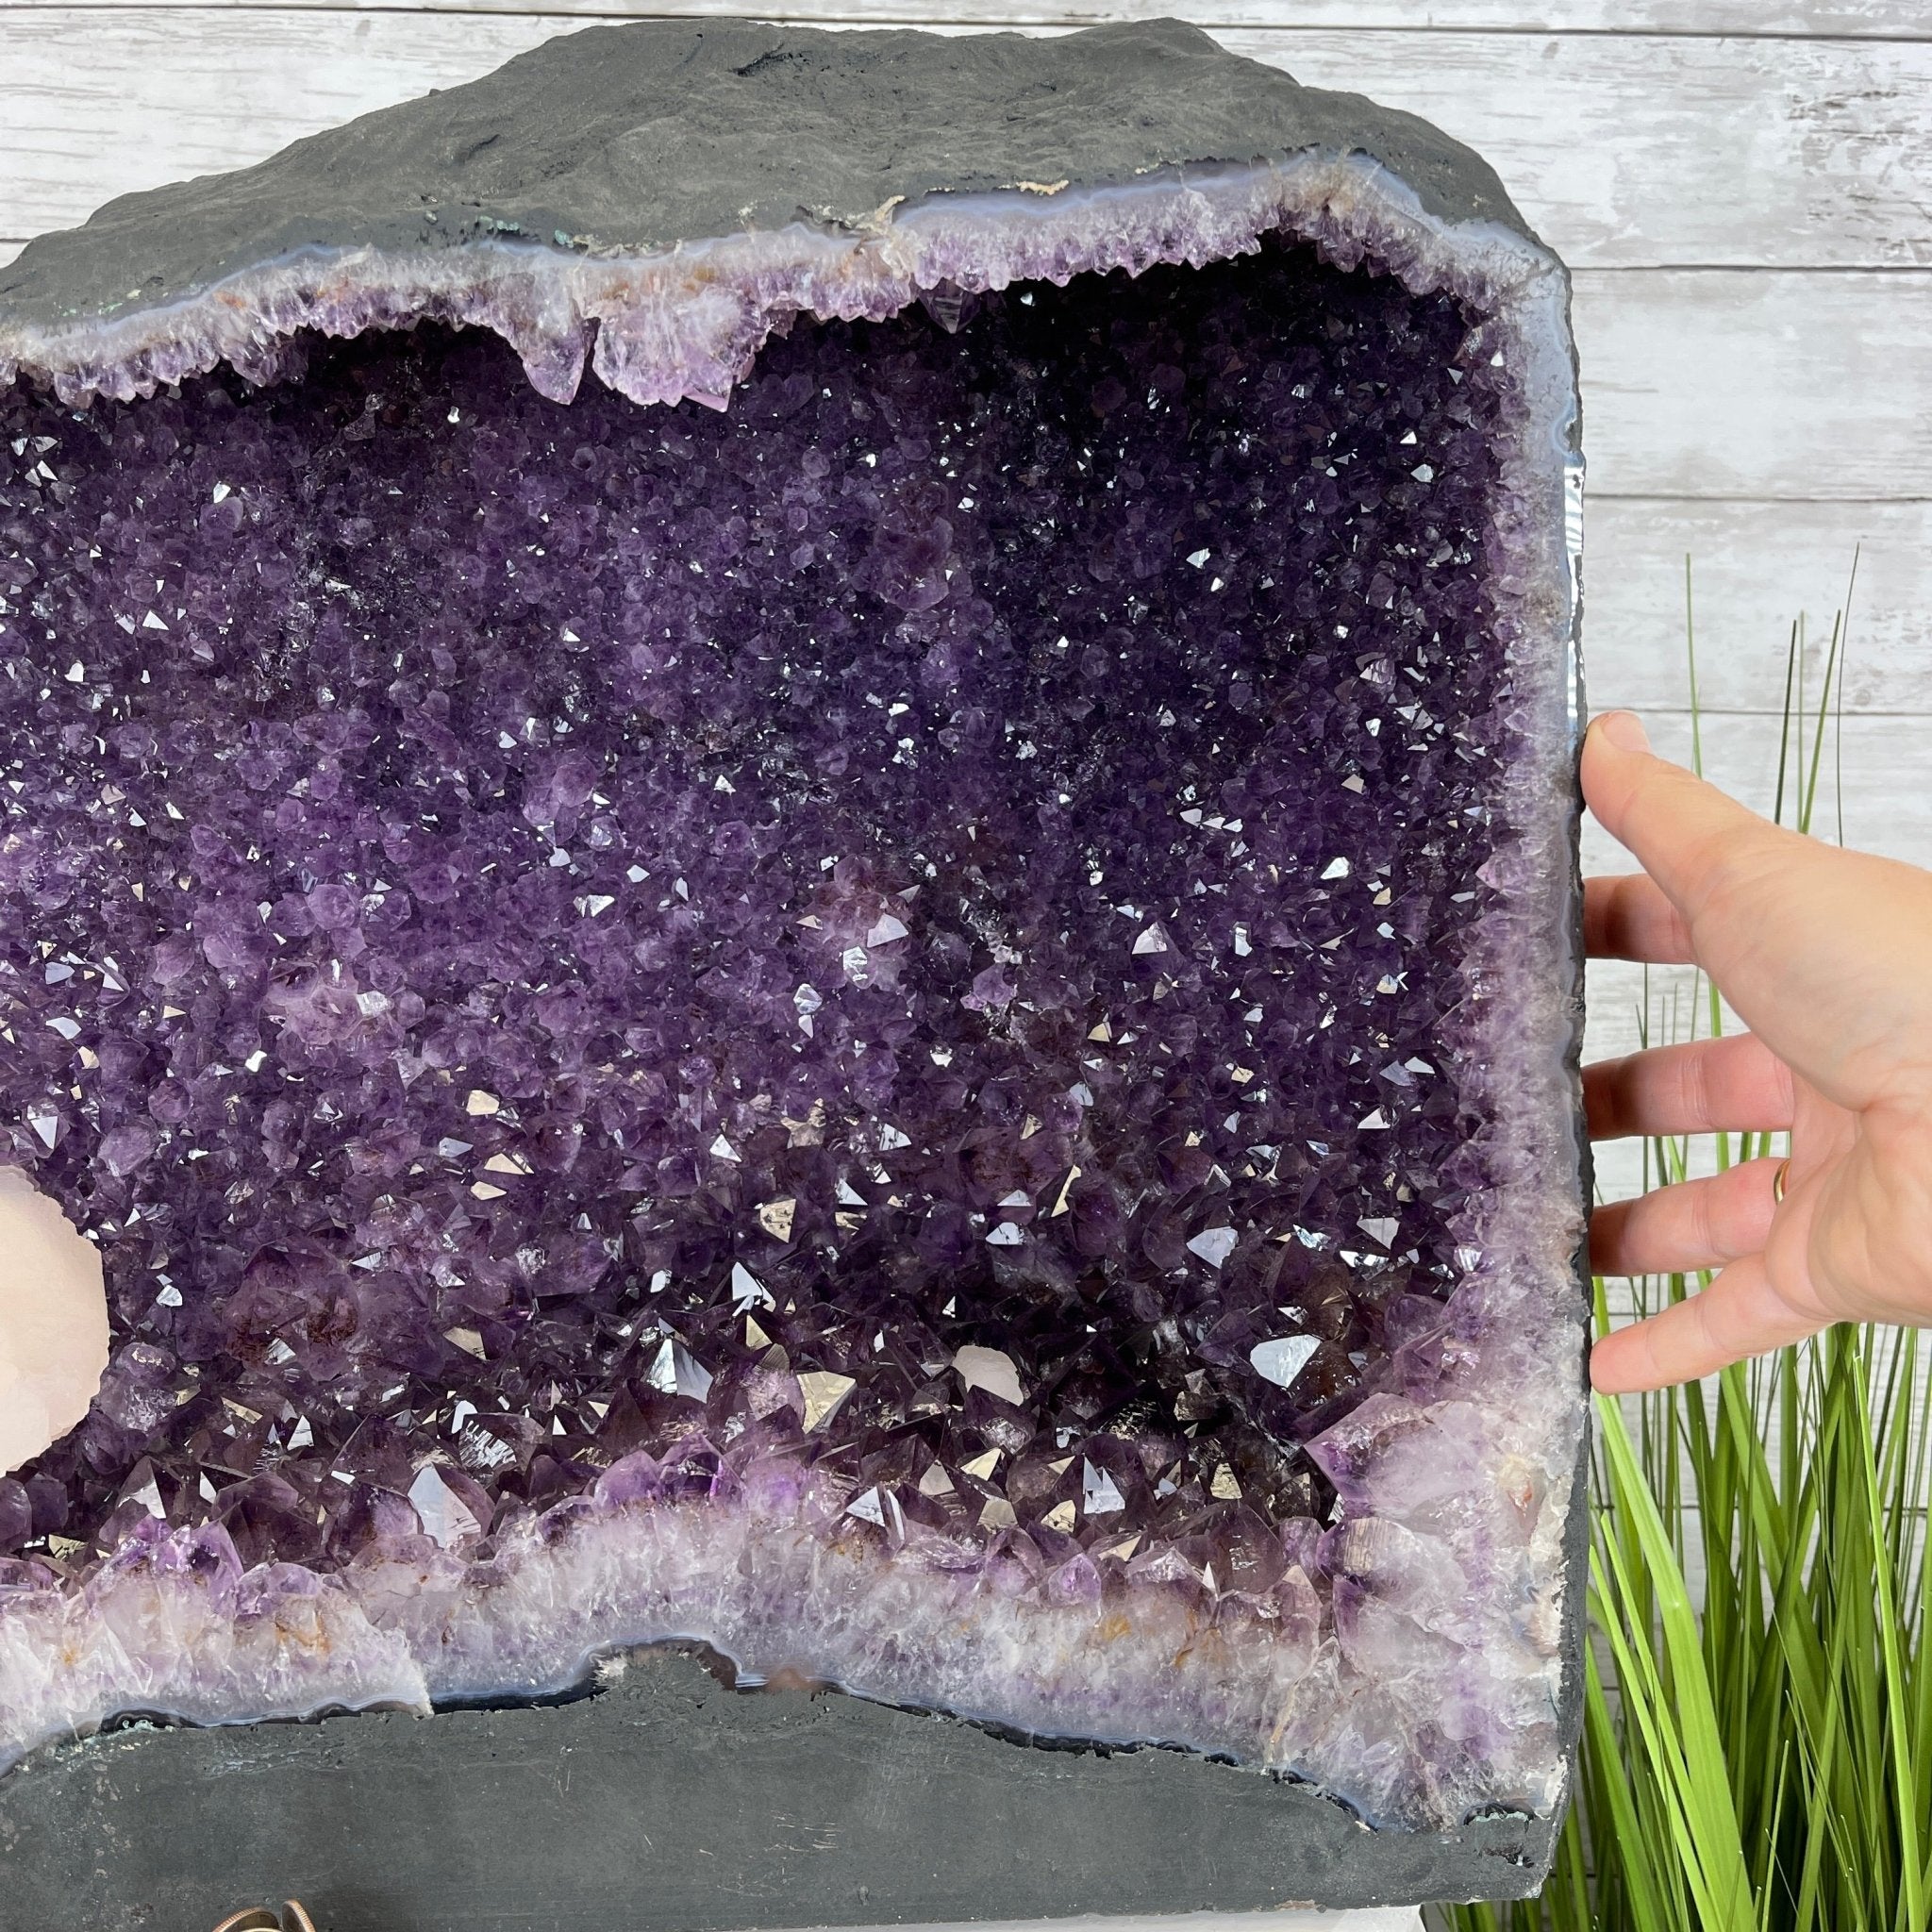 Extra Quality Brazilian Amethyst Cathedral, 102.8 lbs & 17" Tall #5601-0613 by Brazil Gems - Brazil GemsBrazil GemsExtra Quality Brazilian Amethyst Cathedral, 102.8 lbs & 17" Tall #5601-0613 by Brazil GemsCathedrals5601-0613